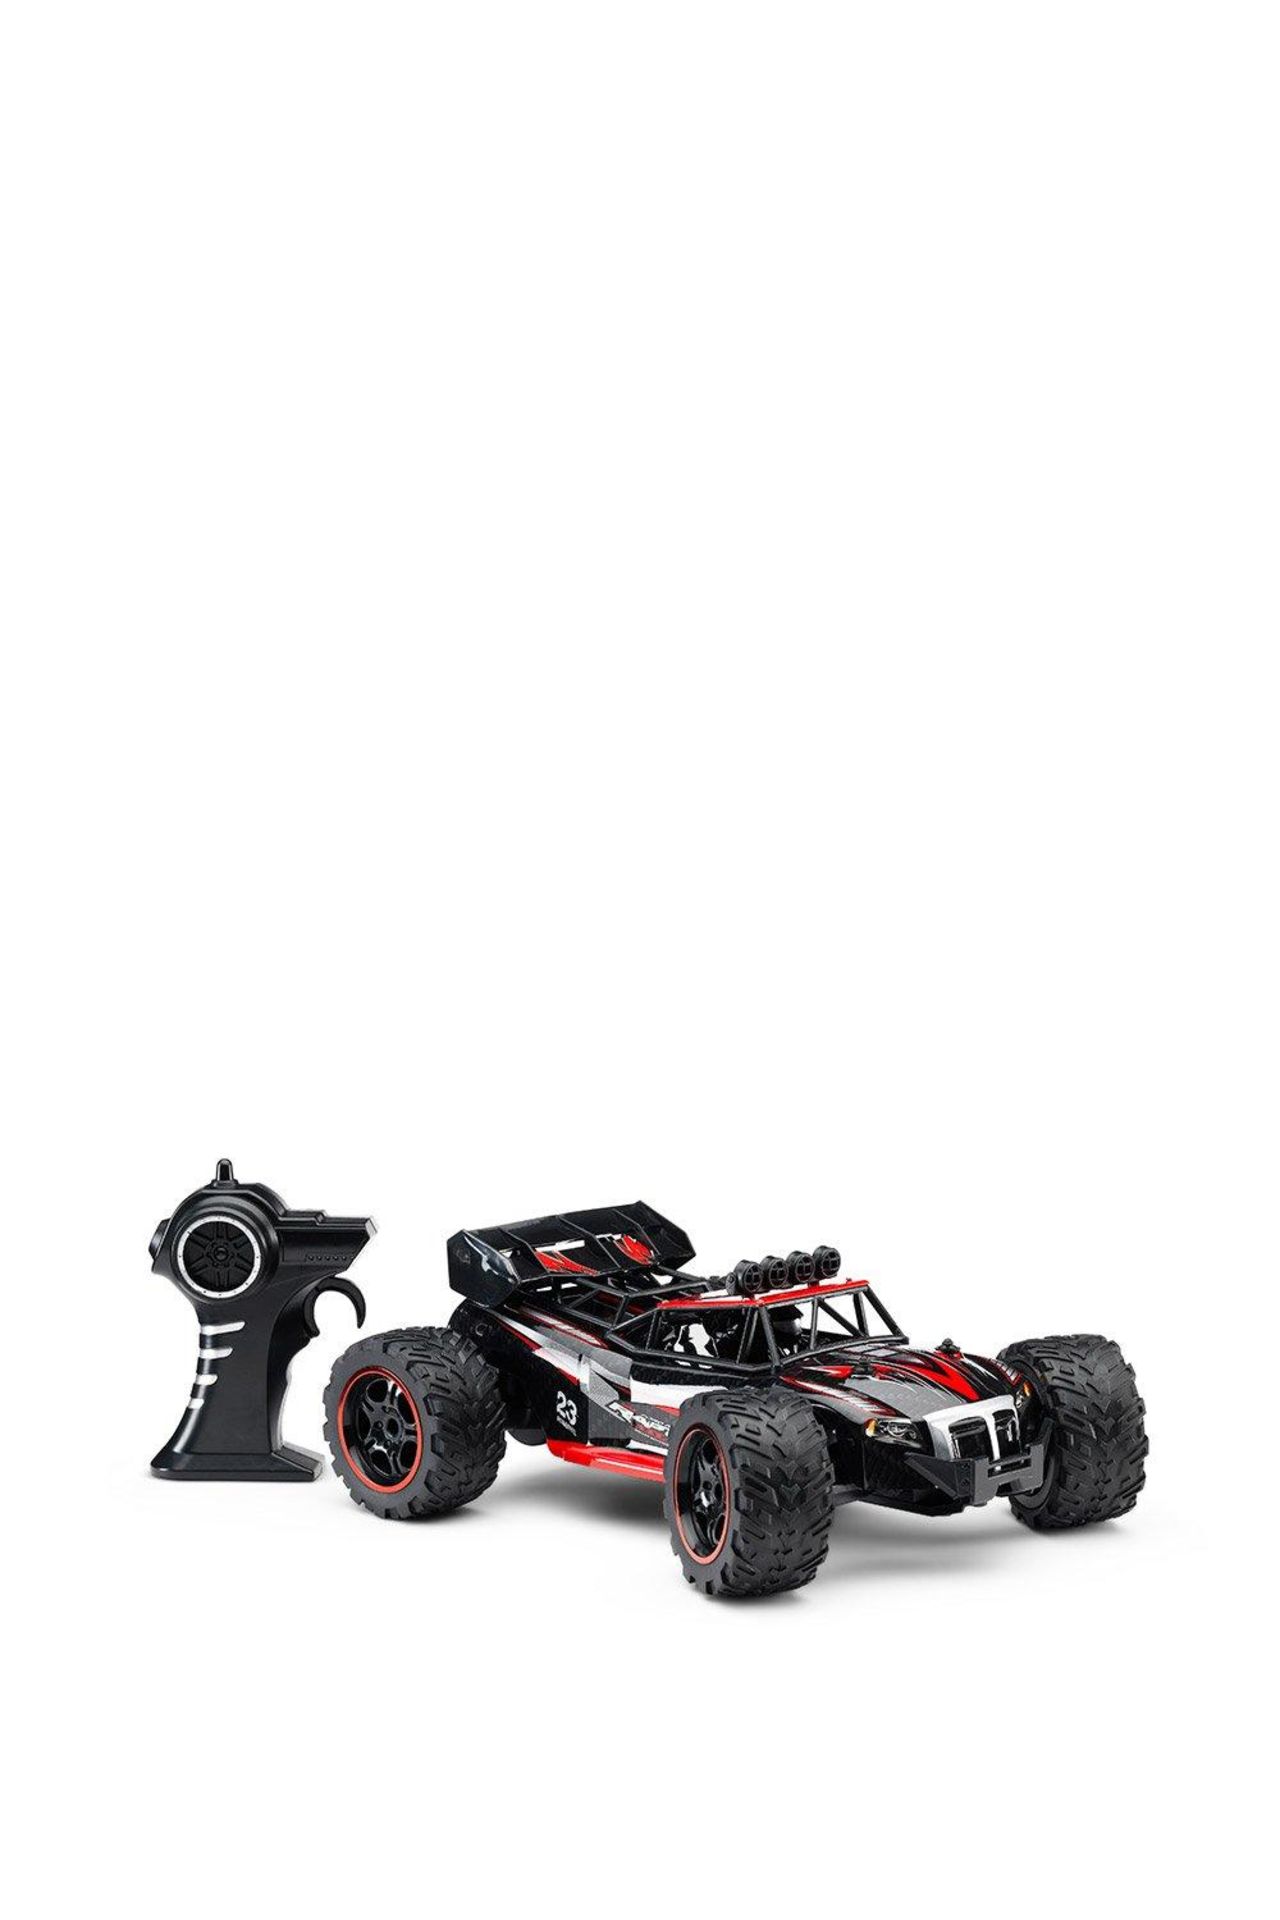 (6A) 8x RC Items. 1x Red5 Dune Buggy. 1x Red5 Monster Truck. 1x FTX Tracer 4WD. 3x X-Knight V2. 2x - Image 3 of 10